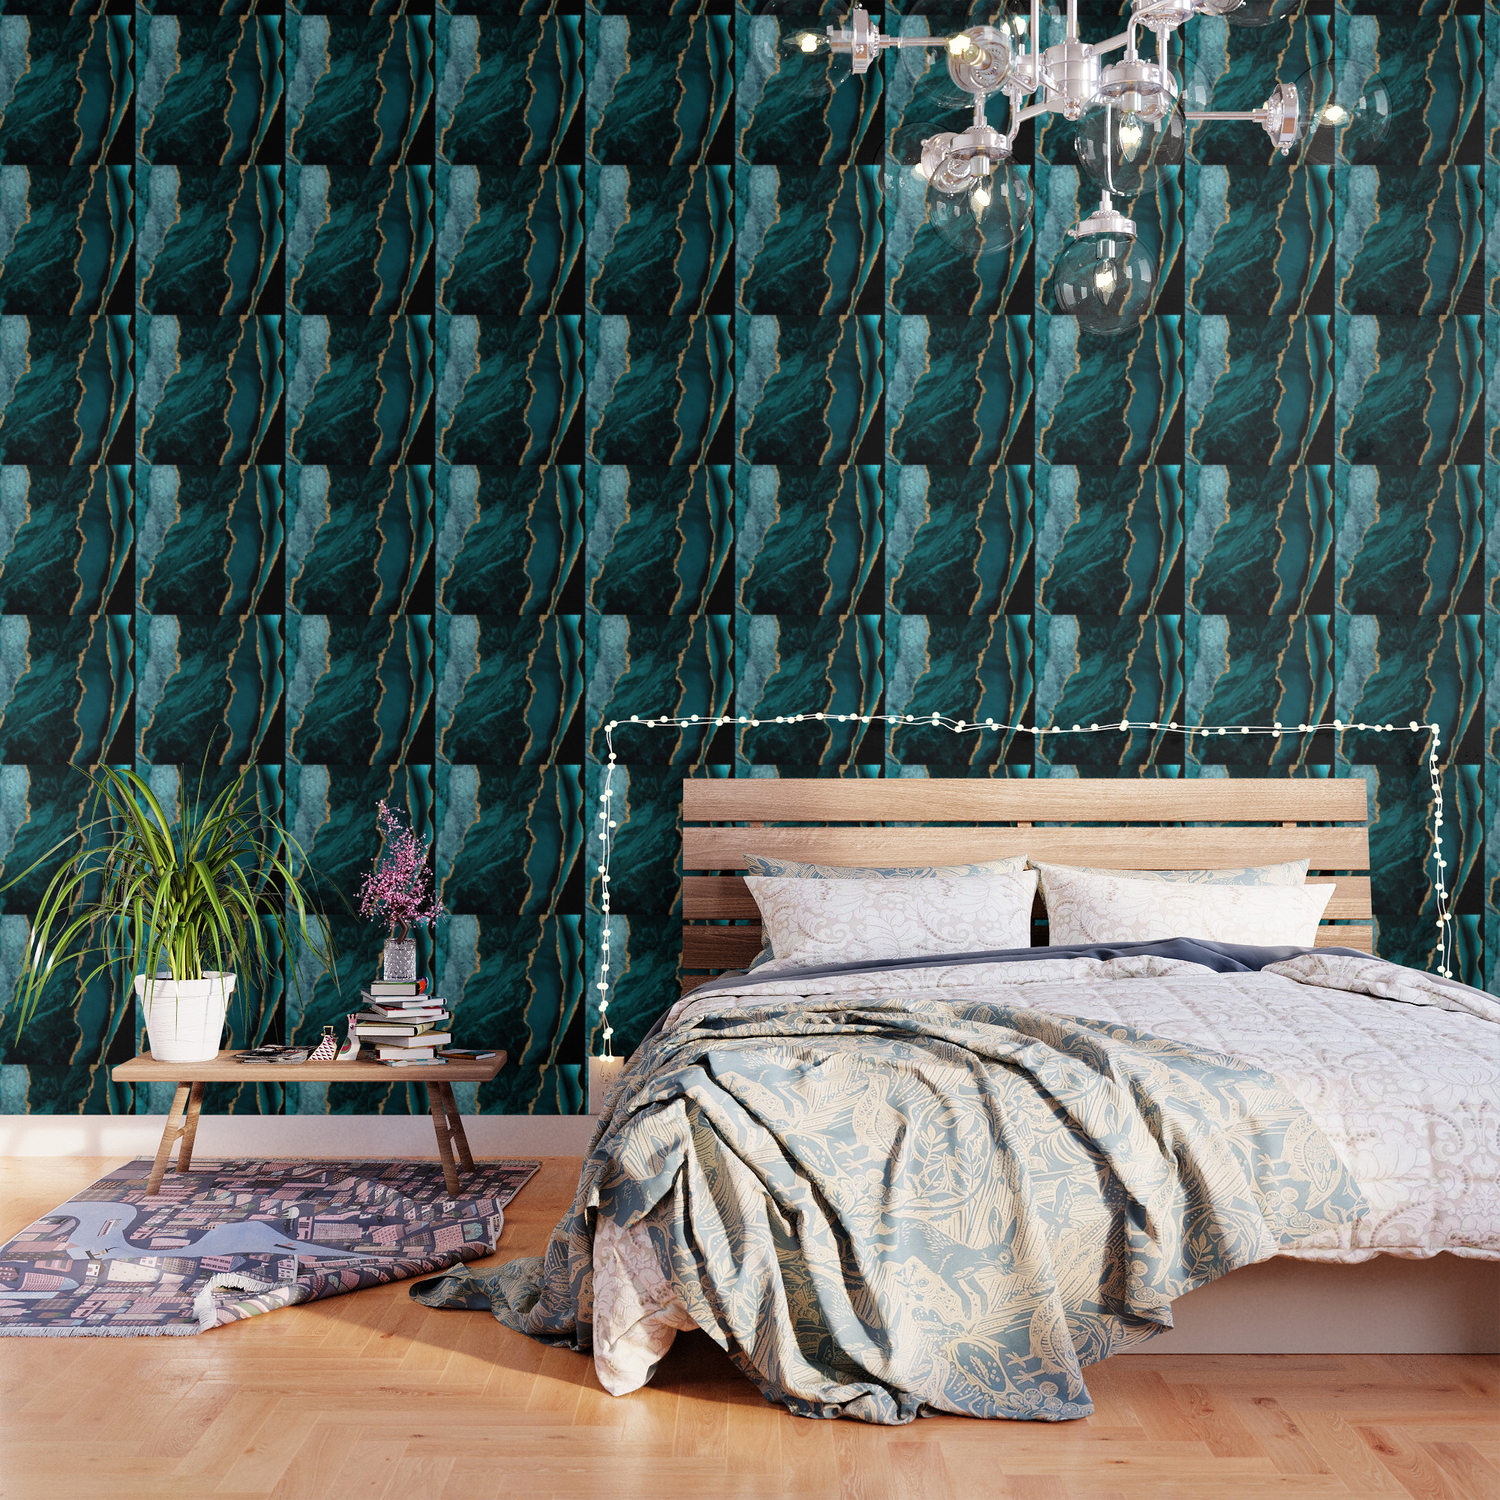 Crushed Green Velvet, Teal And Aqua Marble Wallpaper by DEC02 | Society6